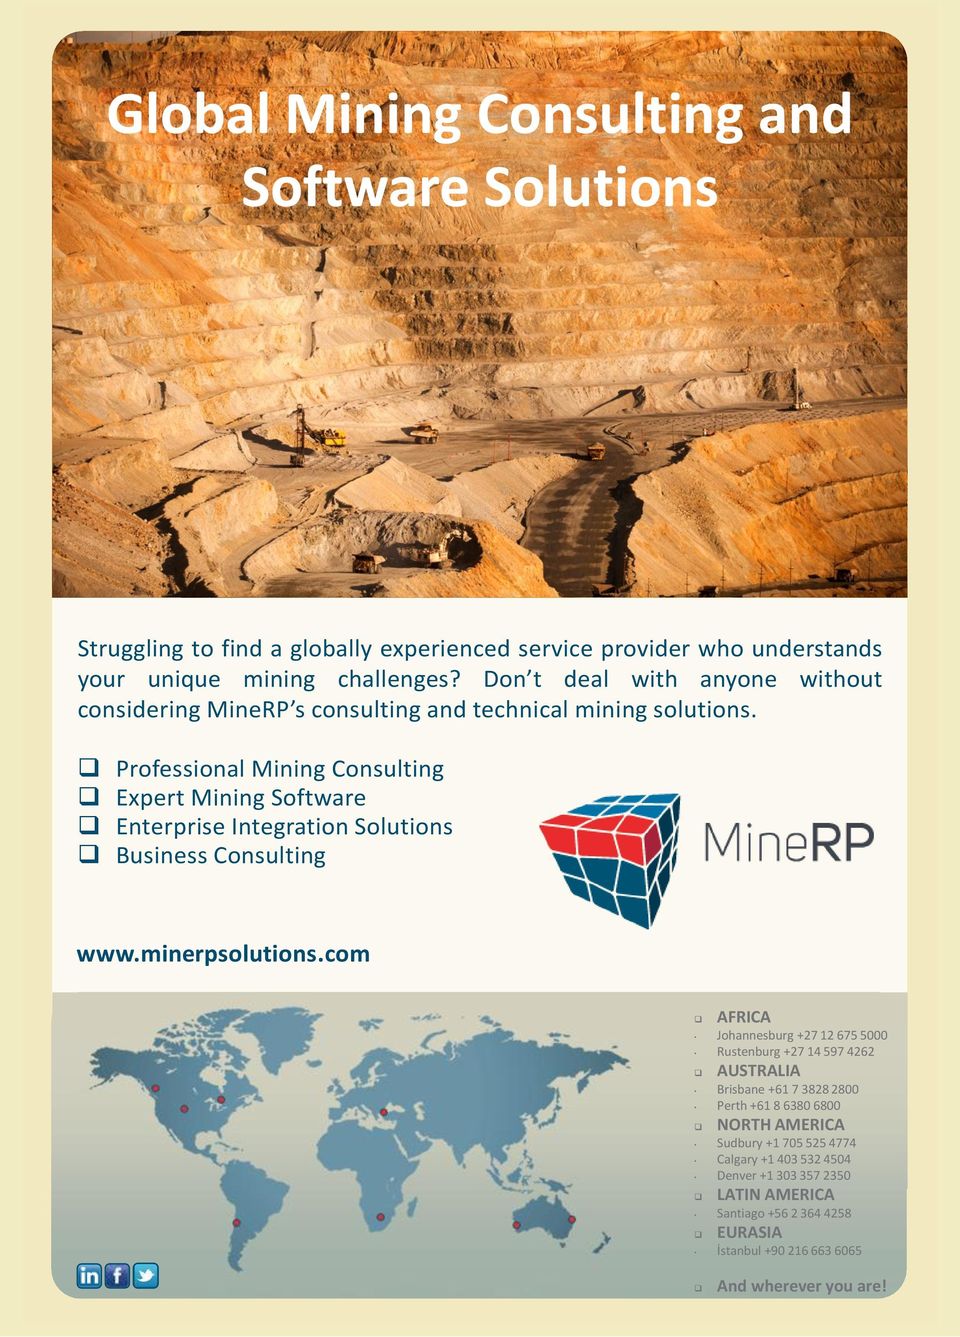 Professional Mining Consulting Expert Mining Software Enterprise Integration Solutions Business Consulting www.minerpsolutions.